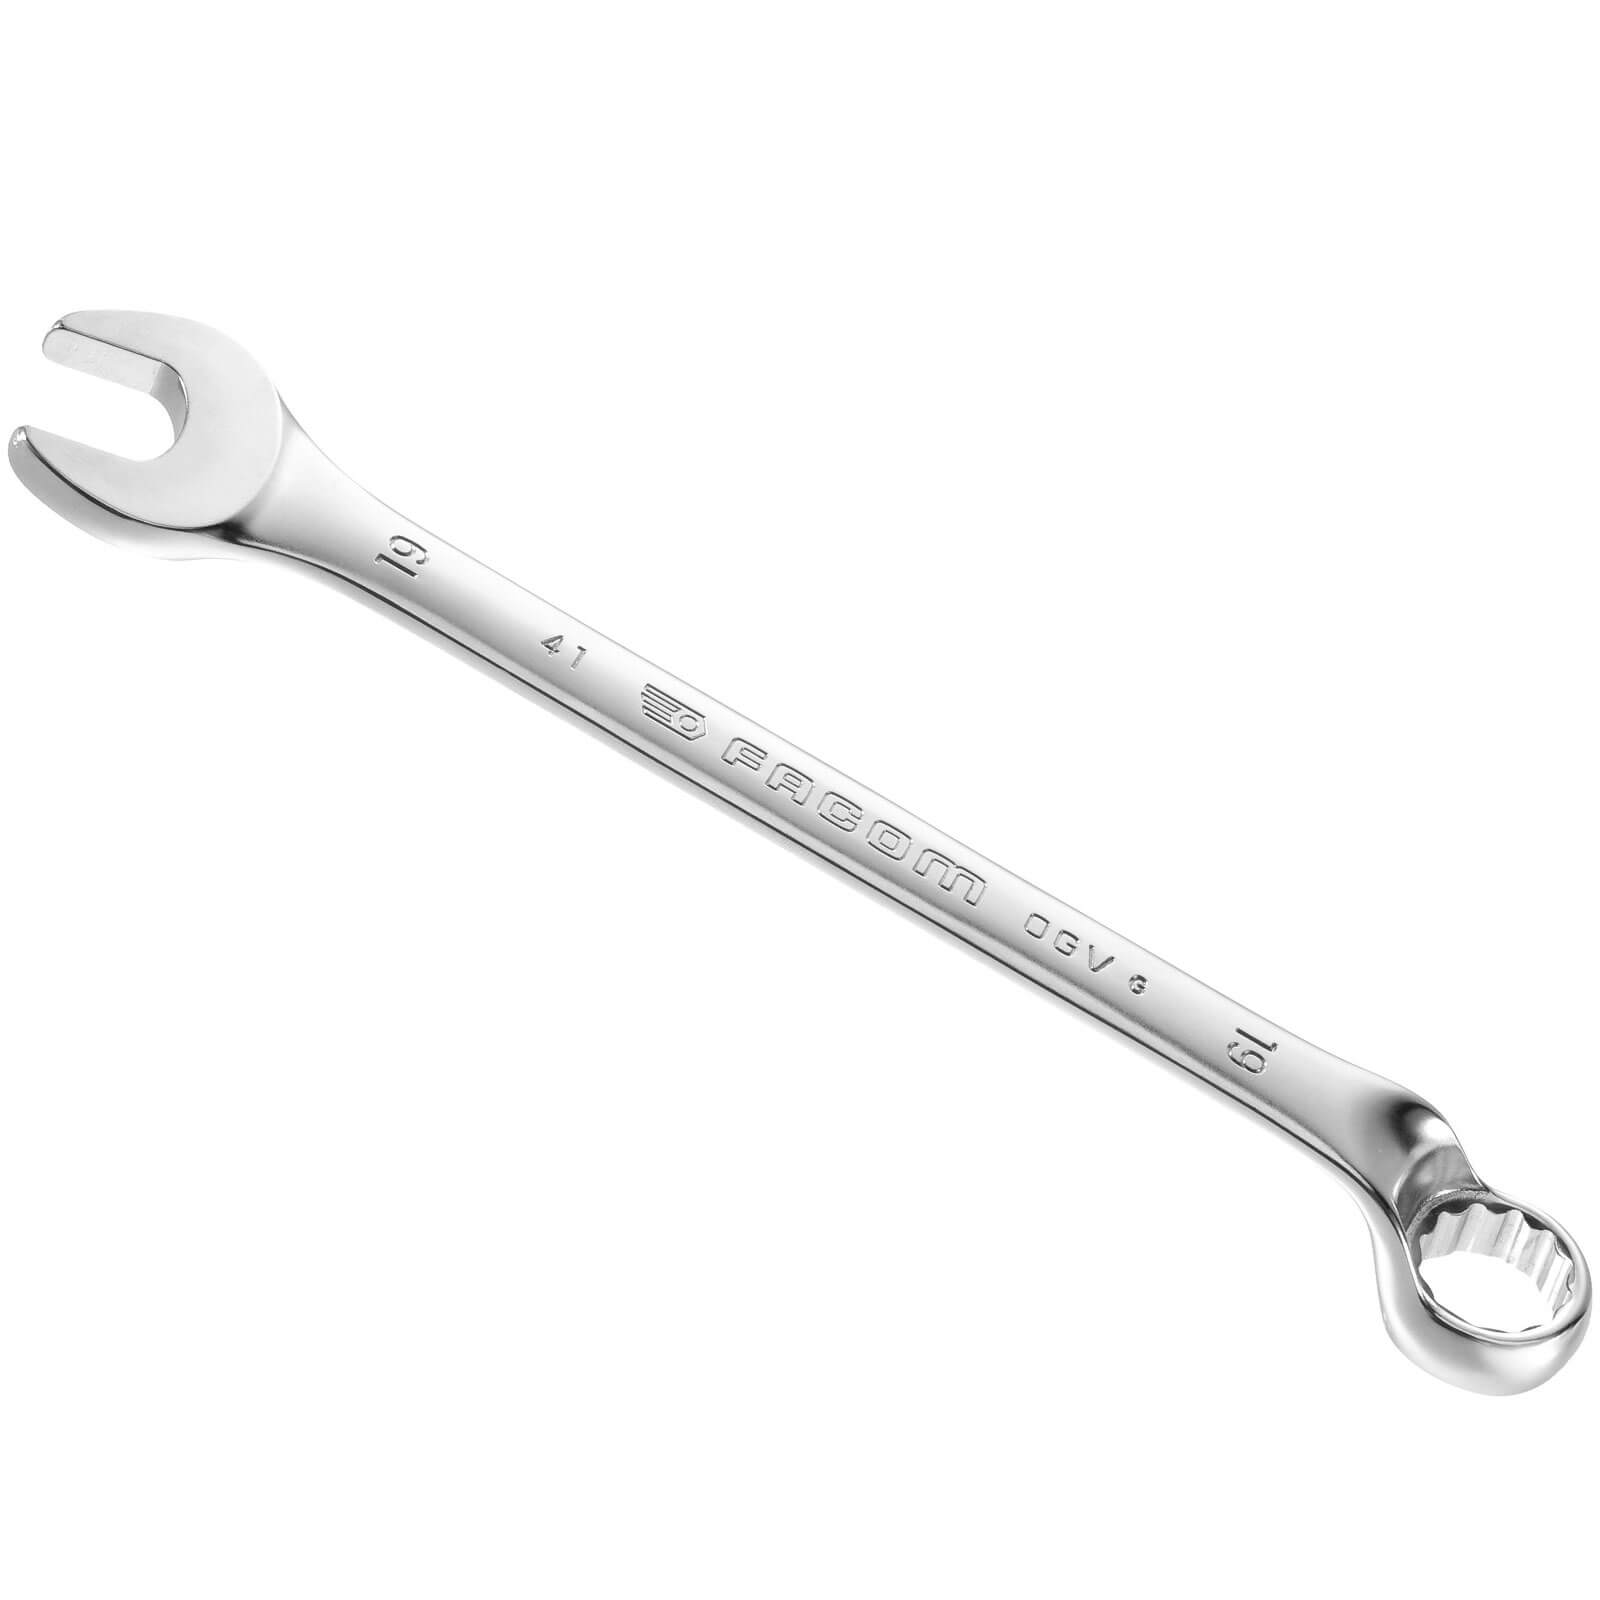 Photo of Facom 41 Series Offset Combination Spanner Metric 9mm